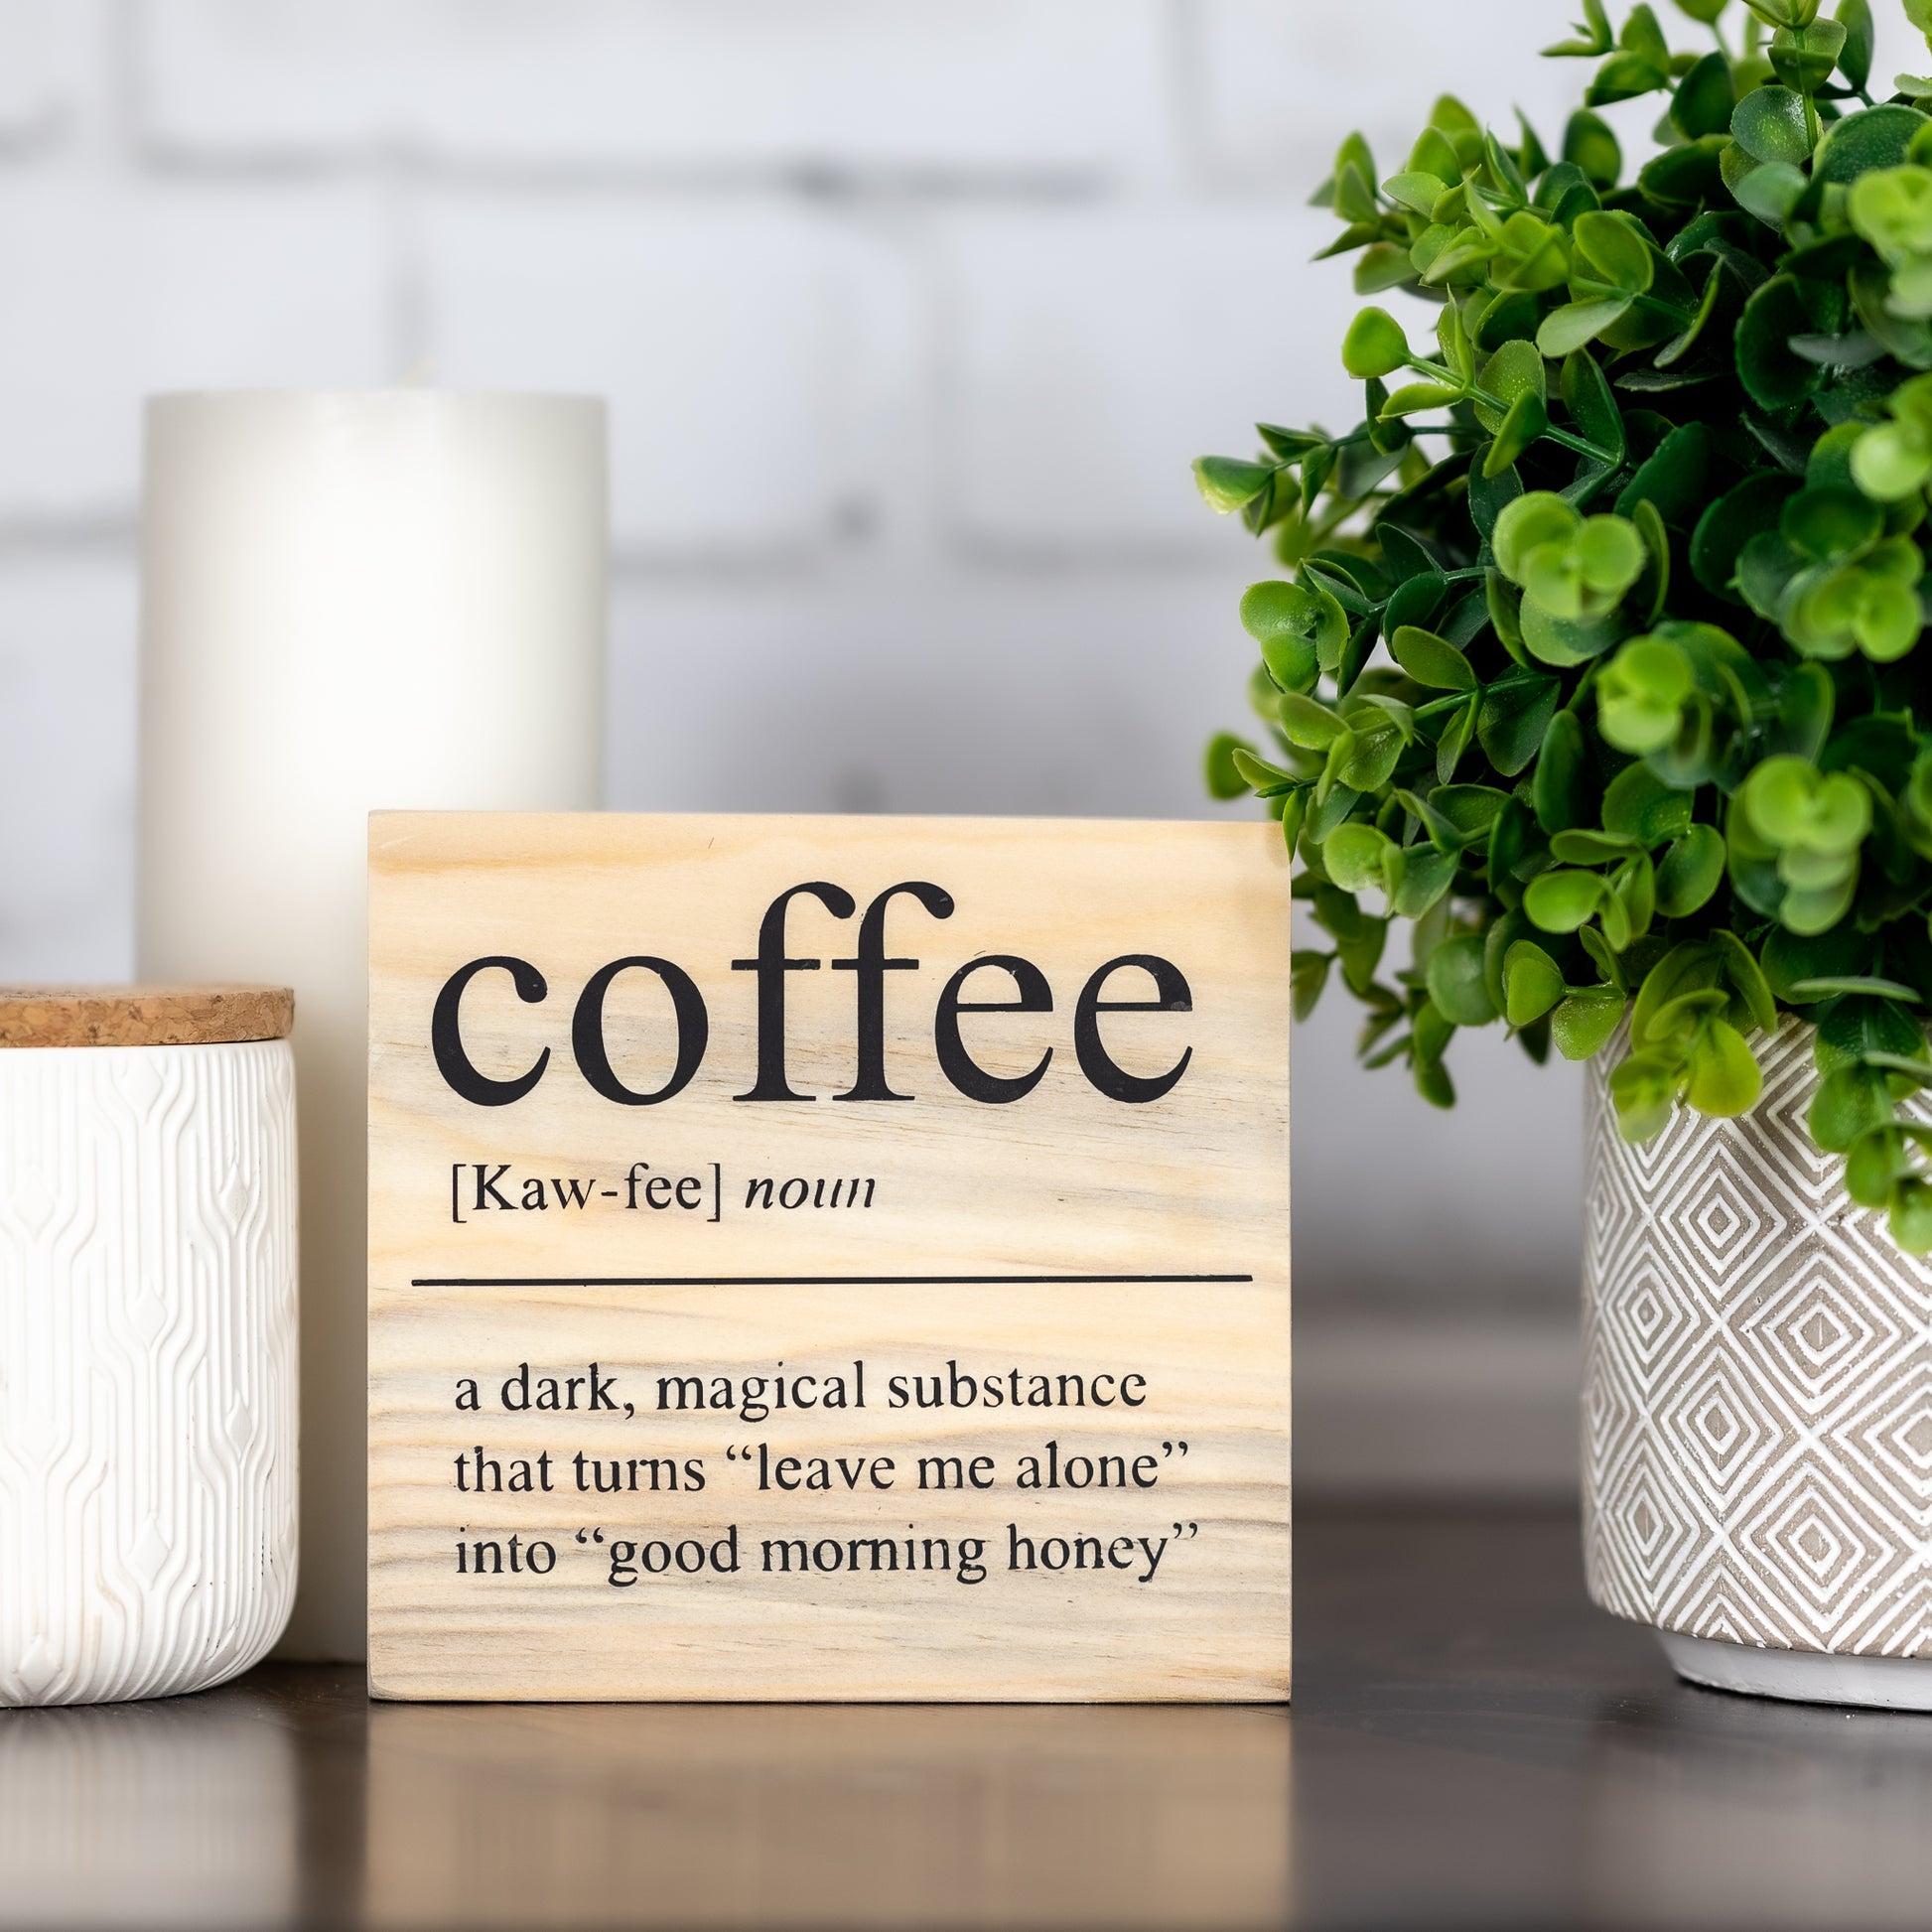 coffee a dark, magical substance that turns "leave me alone" into "good morning honey" ~ shelf block sign